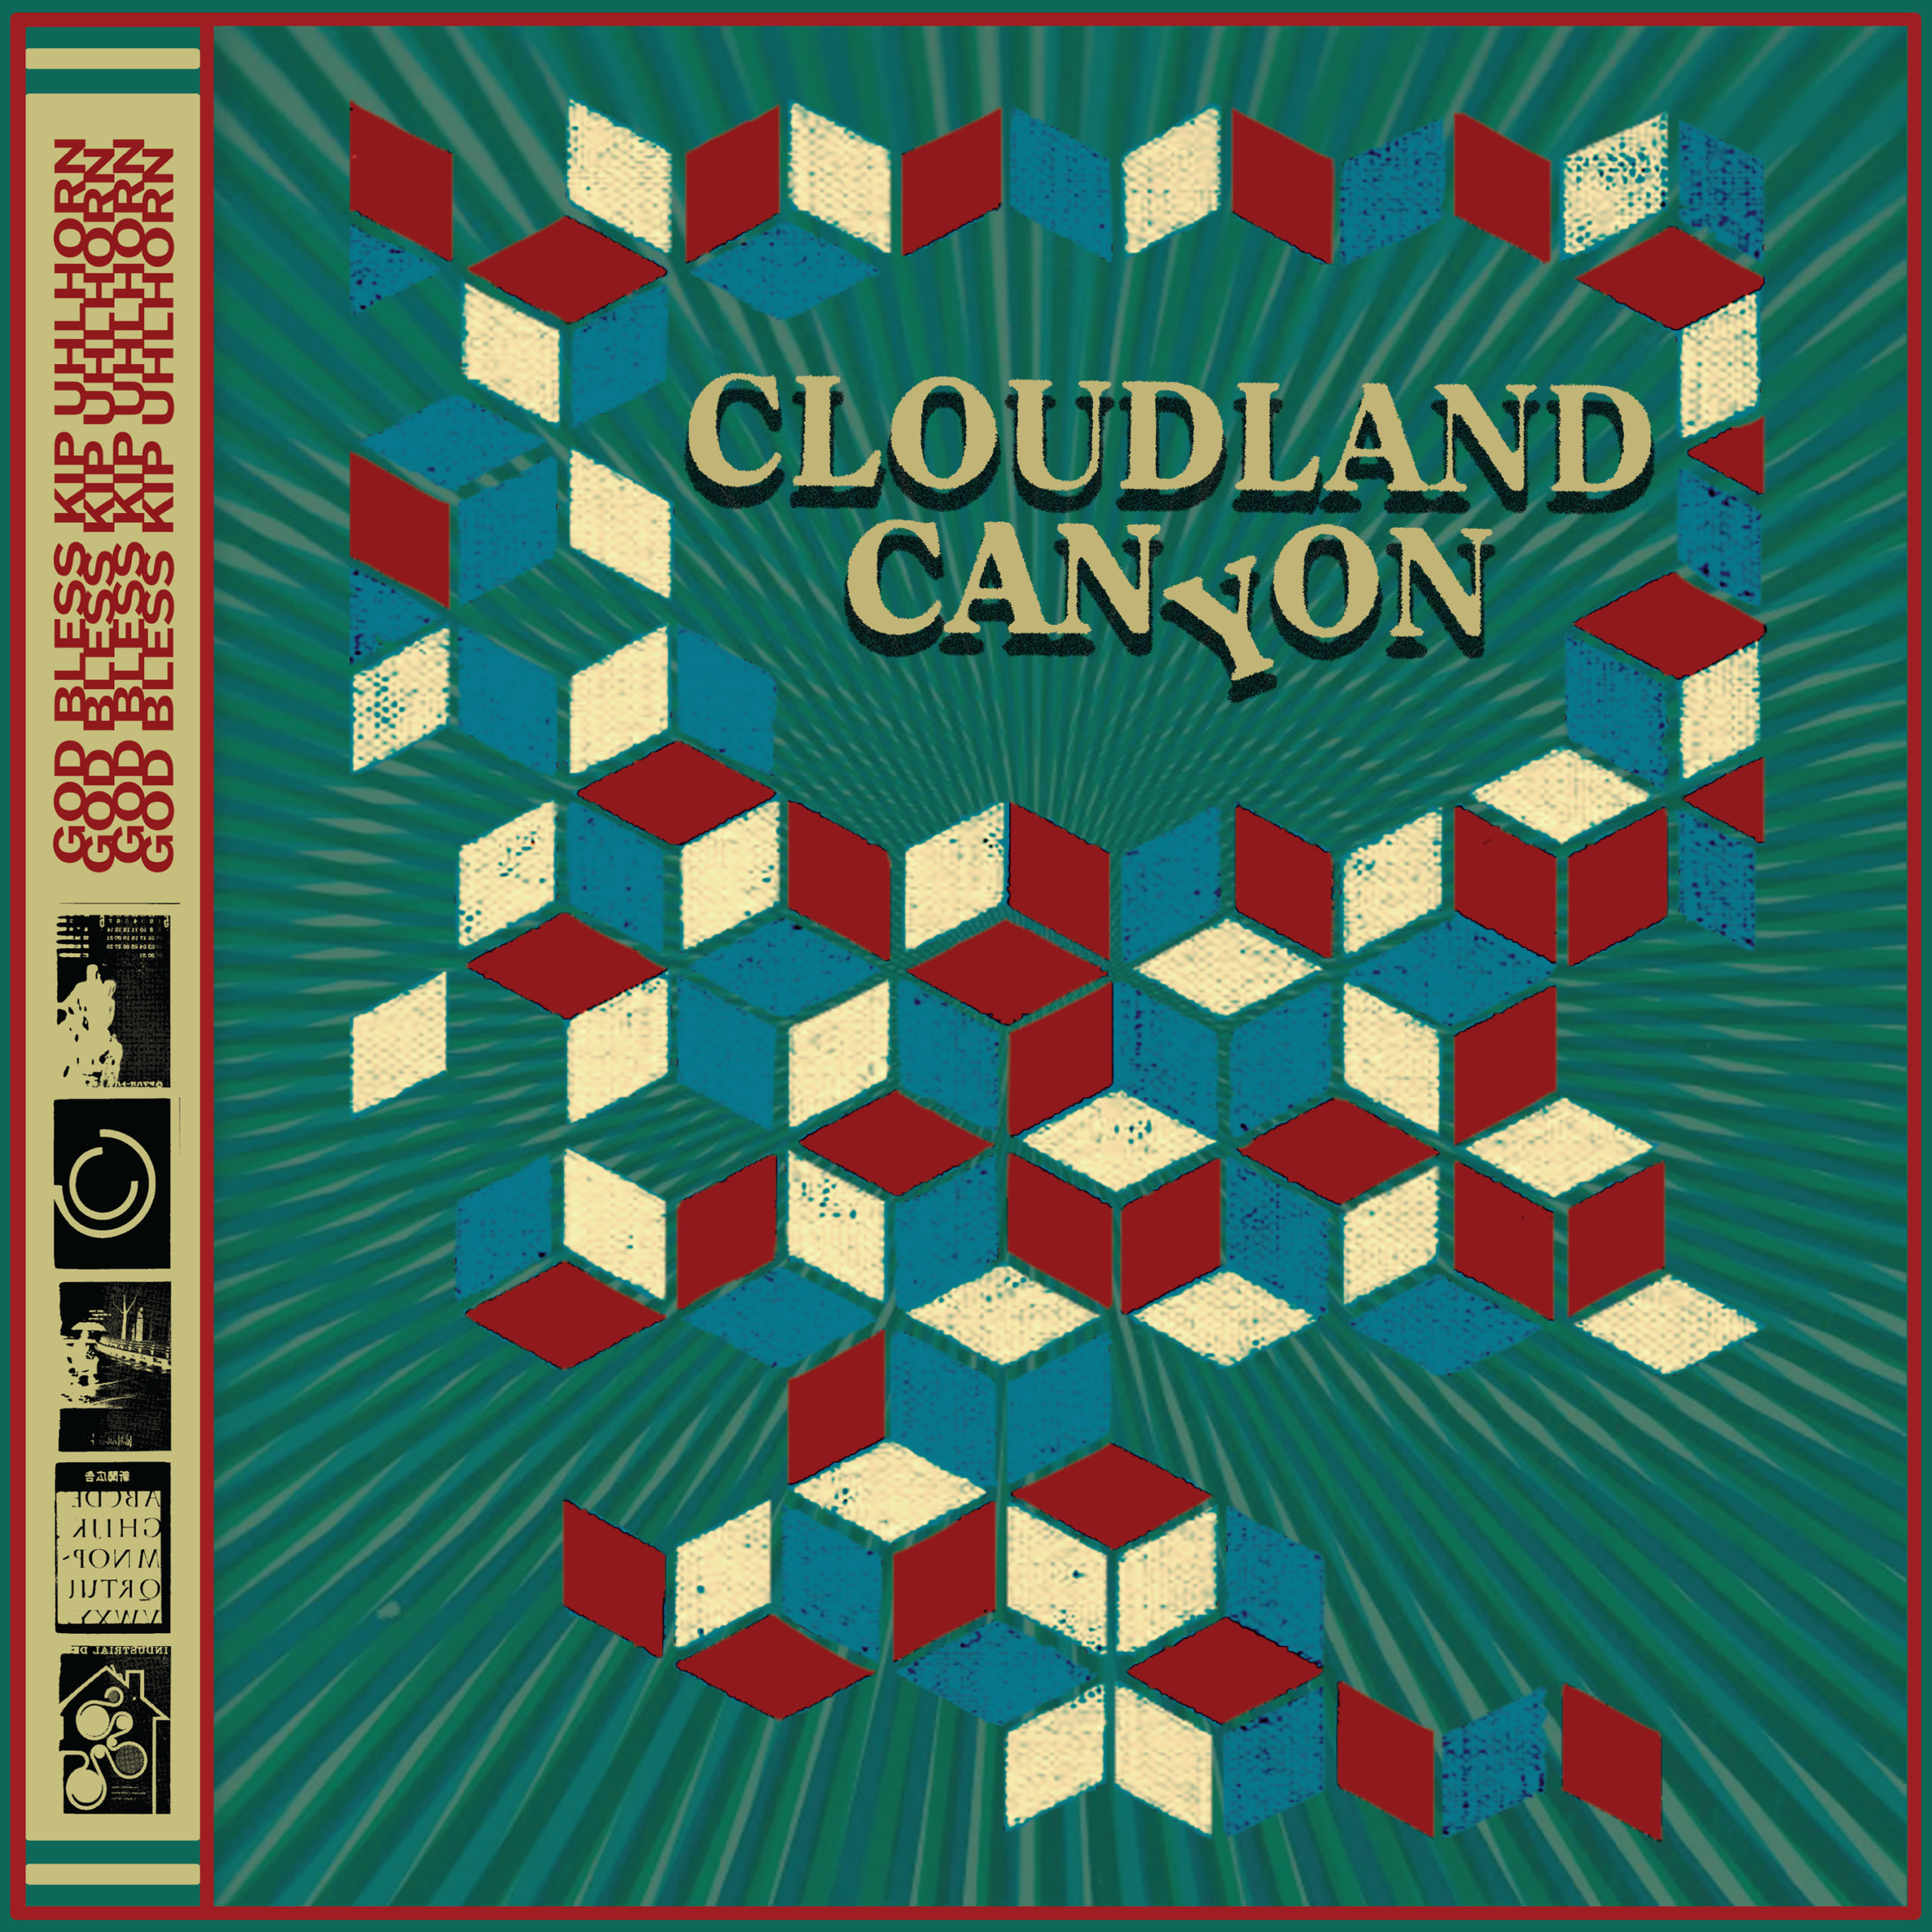 Cloudland Canyon shares new single, “Internet Dreams” ahead of new LP